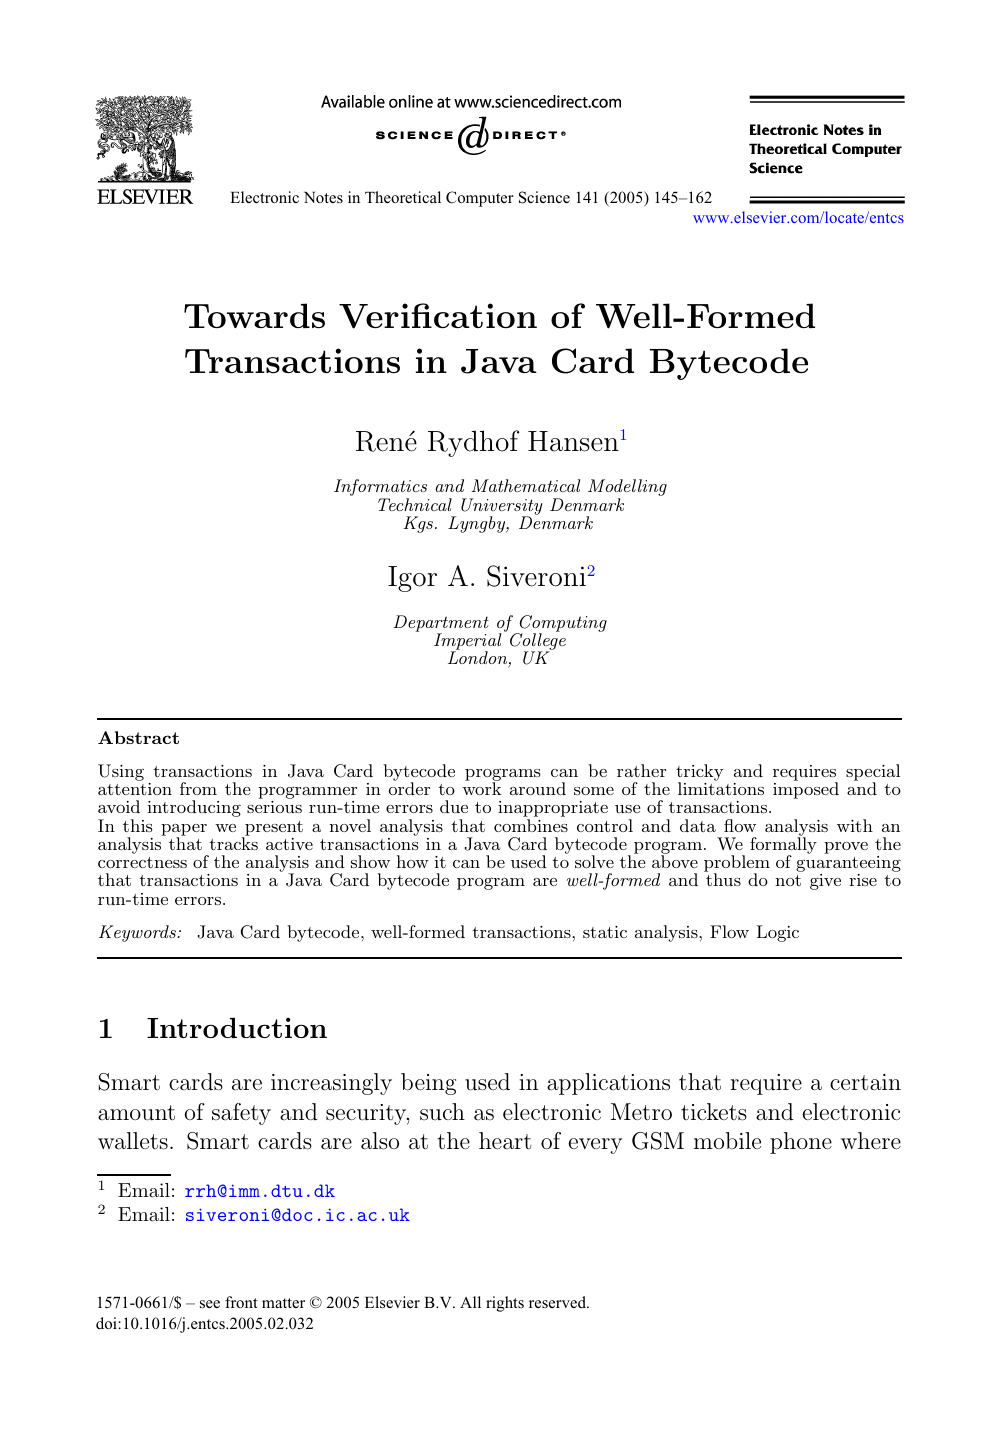 Towards Verification Of Well Formed Transactions In Java Card Bytecode Topic Of Research Paper In Computer And Information Sciences Download Scholarly Article Pdf And Read For Free On Cyberleninka Open Science Hub